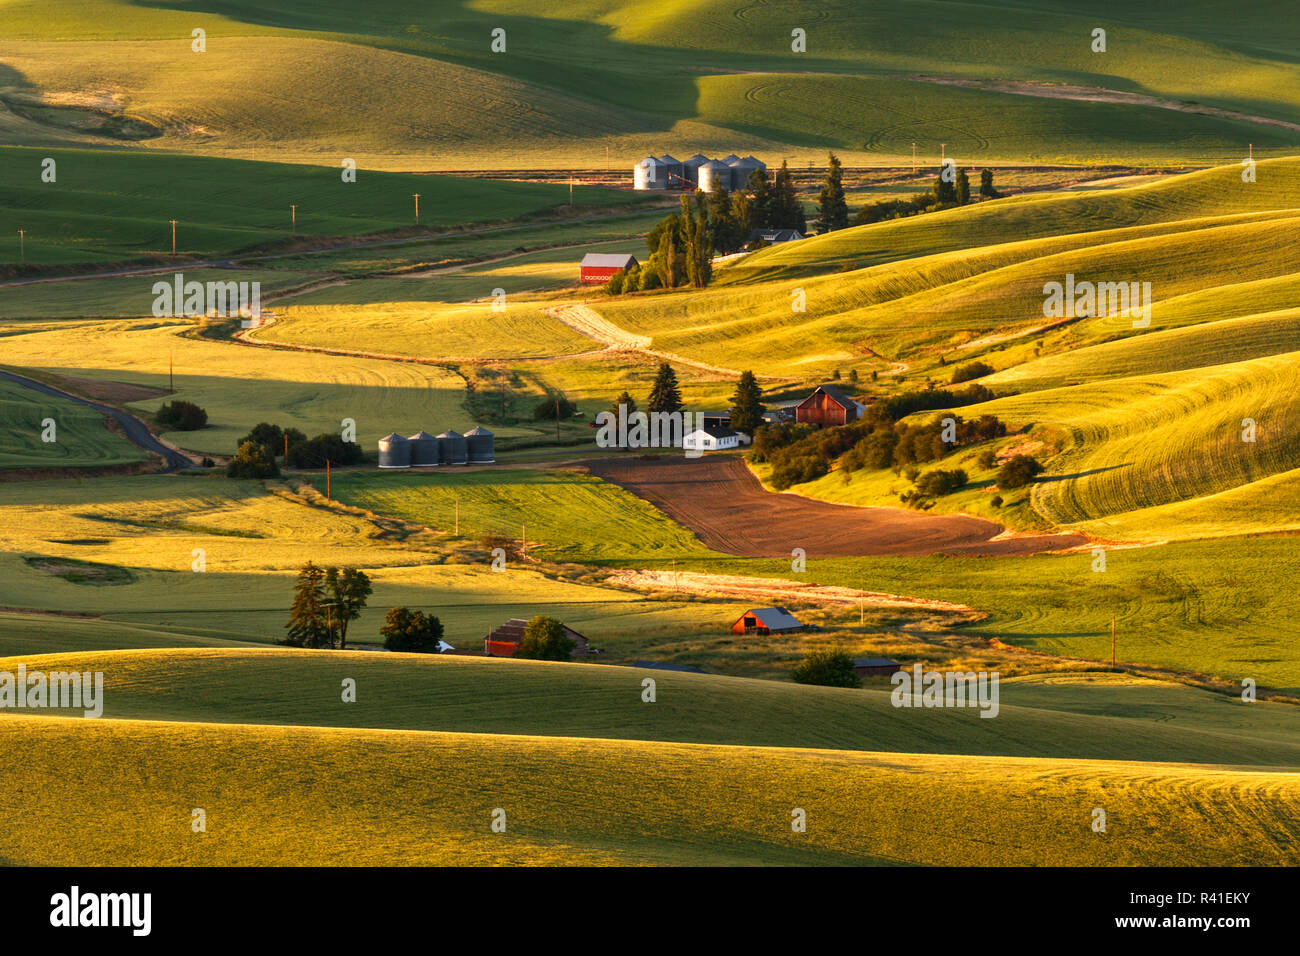 Rolling landscape of wheat fields and red barns viewed from Steptoe Butte, Palouse farming region of Eastern Washington State Stock Photo